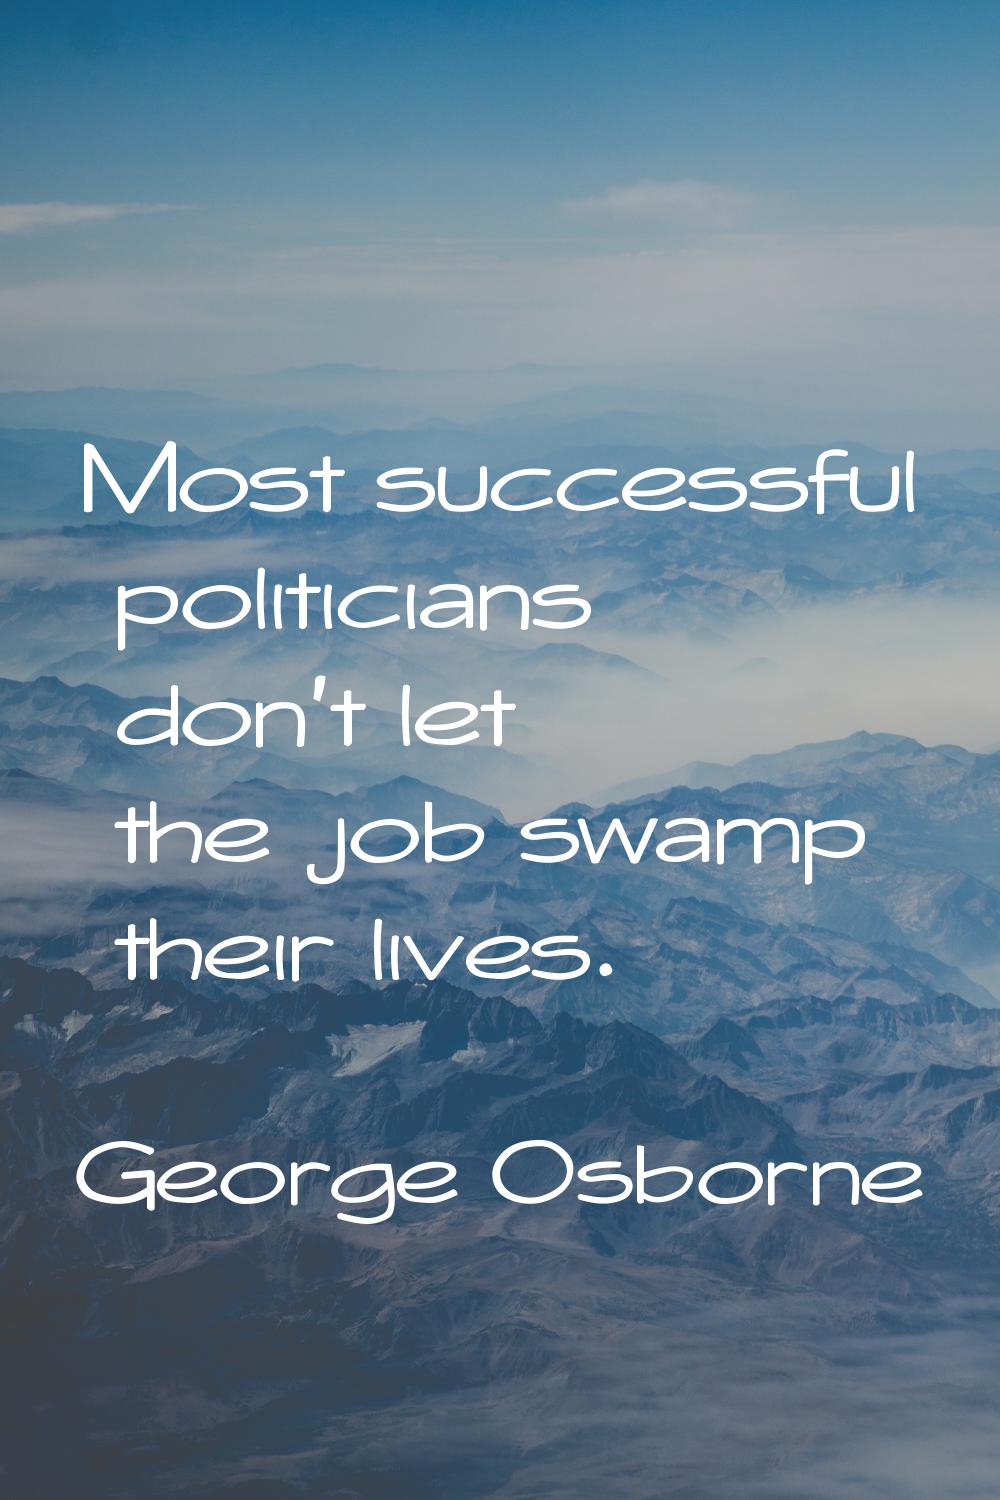 Most successful politicians don't let the job swamp their lives.